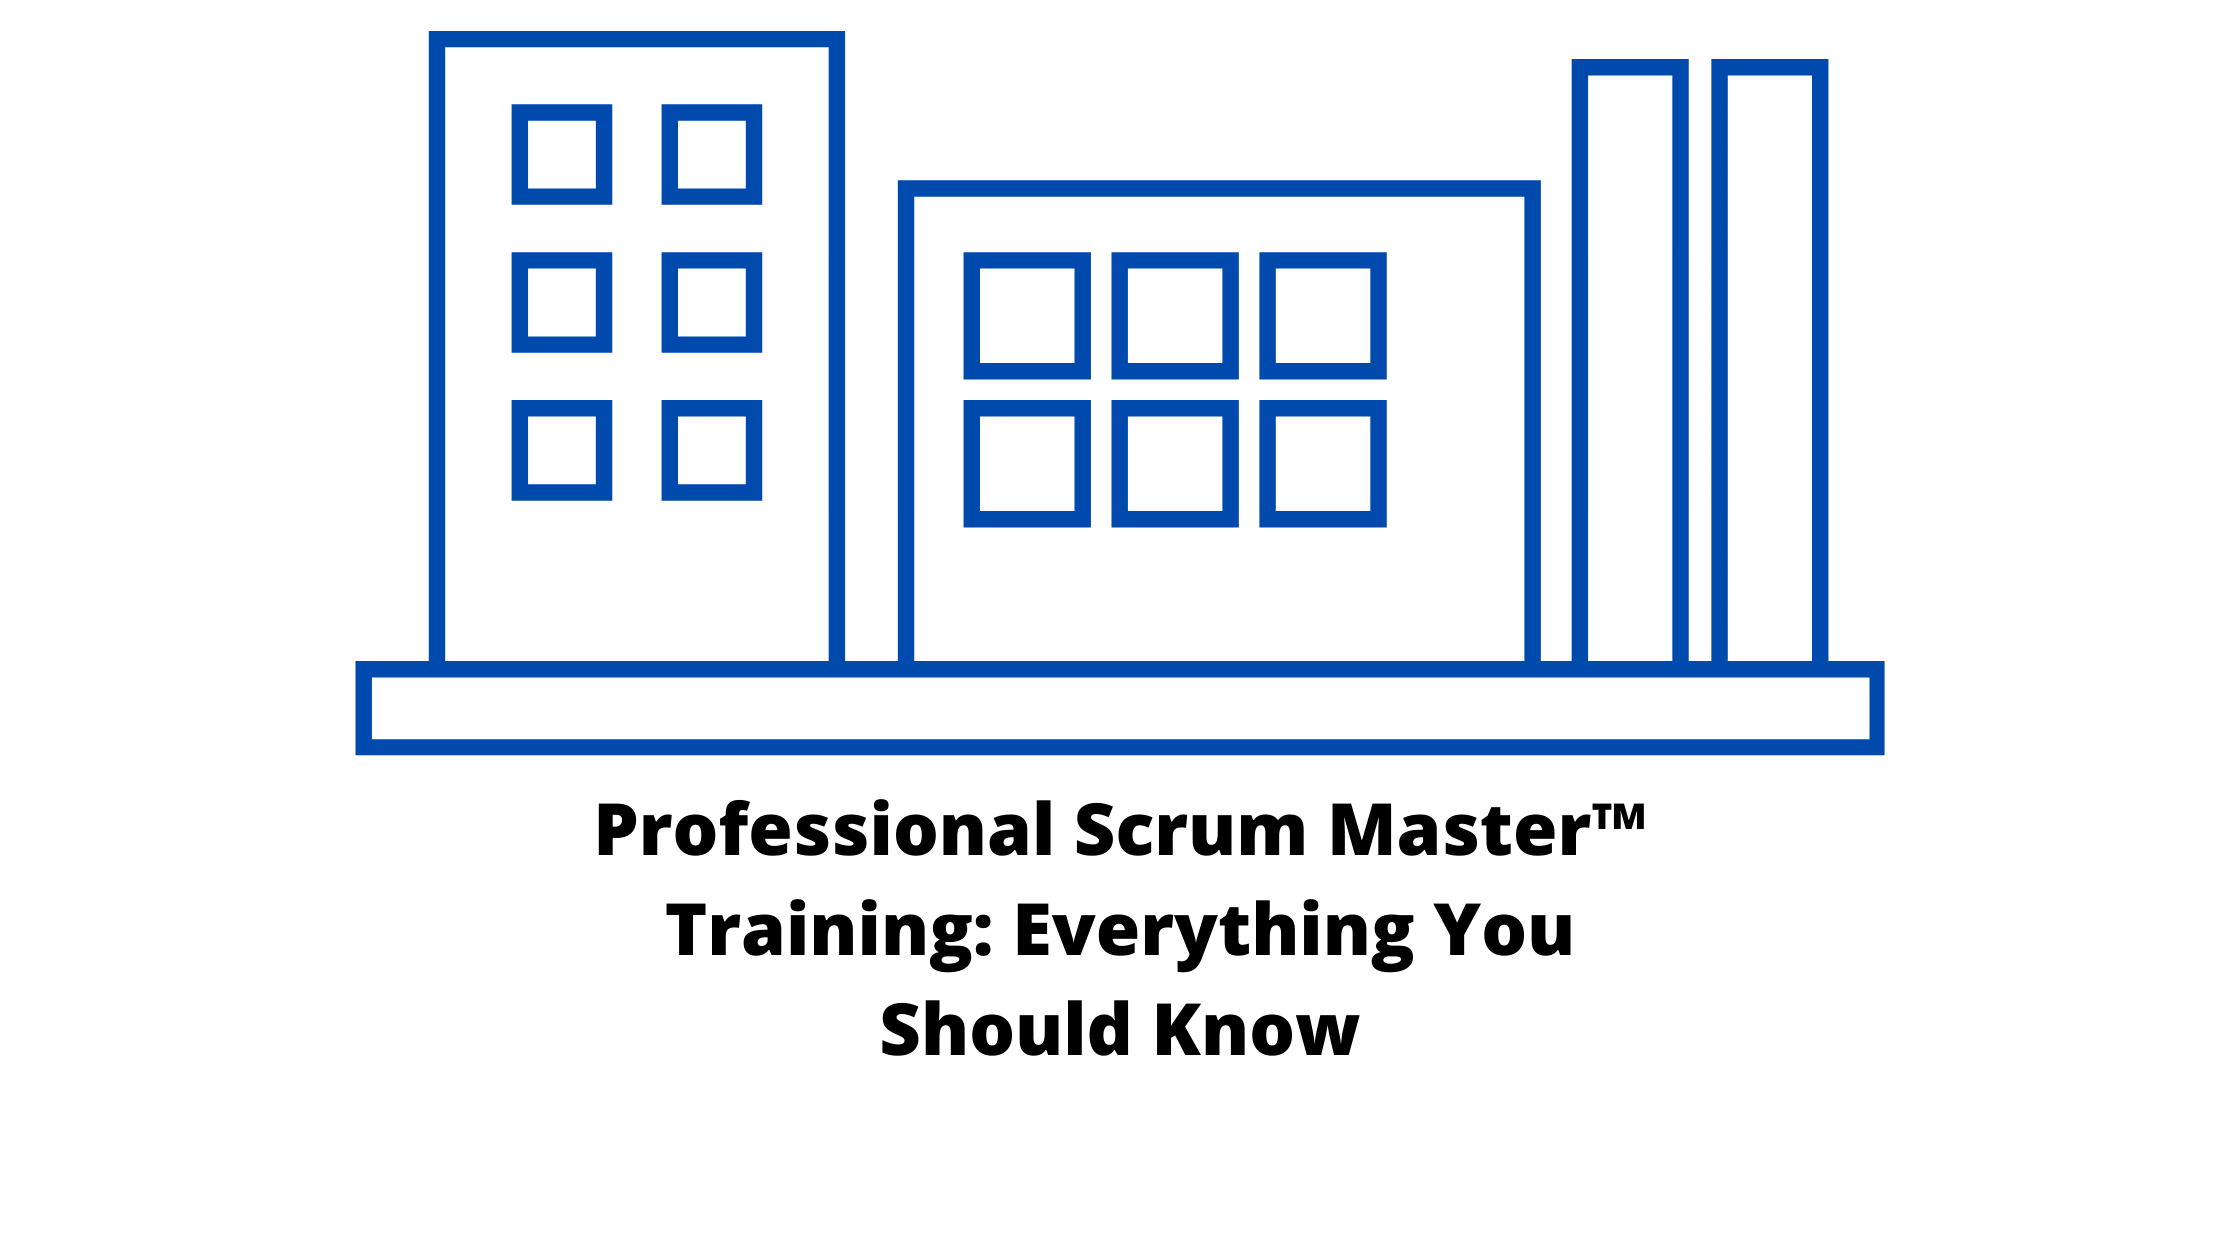 Professional Scrum Master™ Training: Everything You Should Know